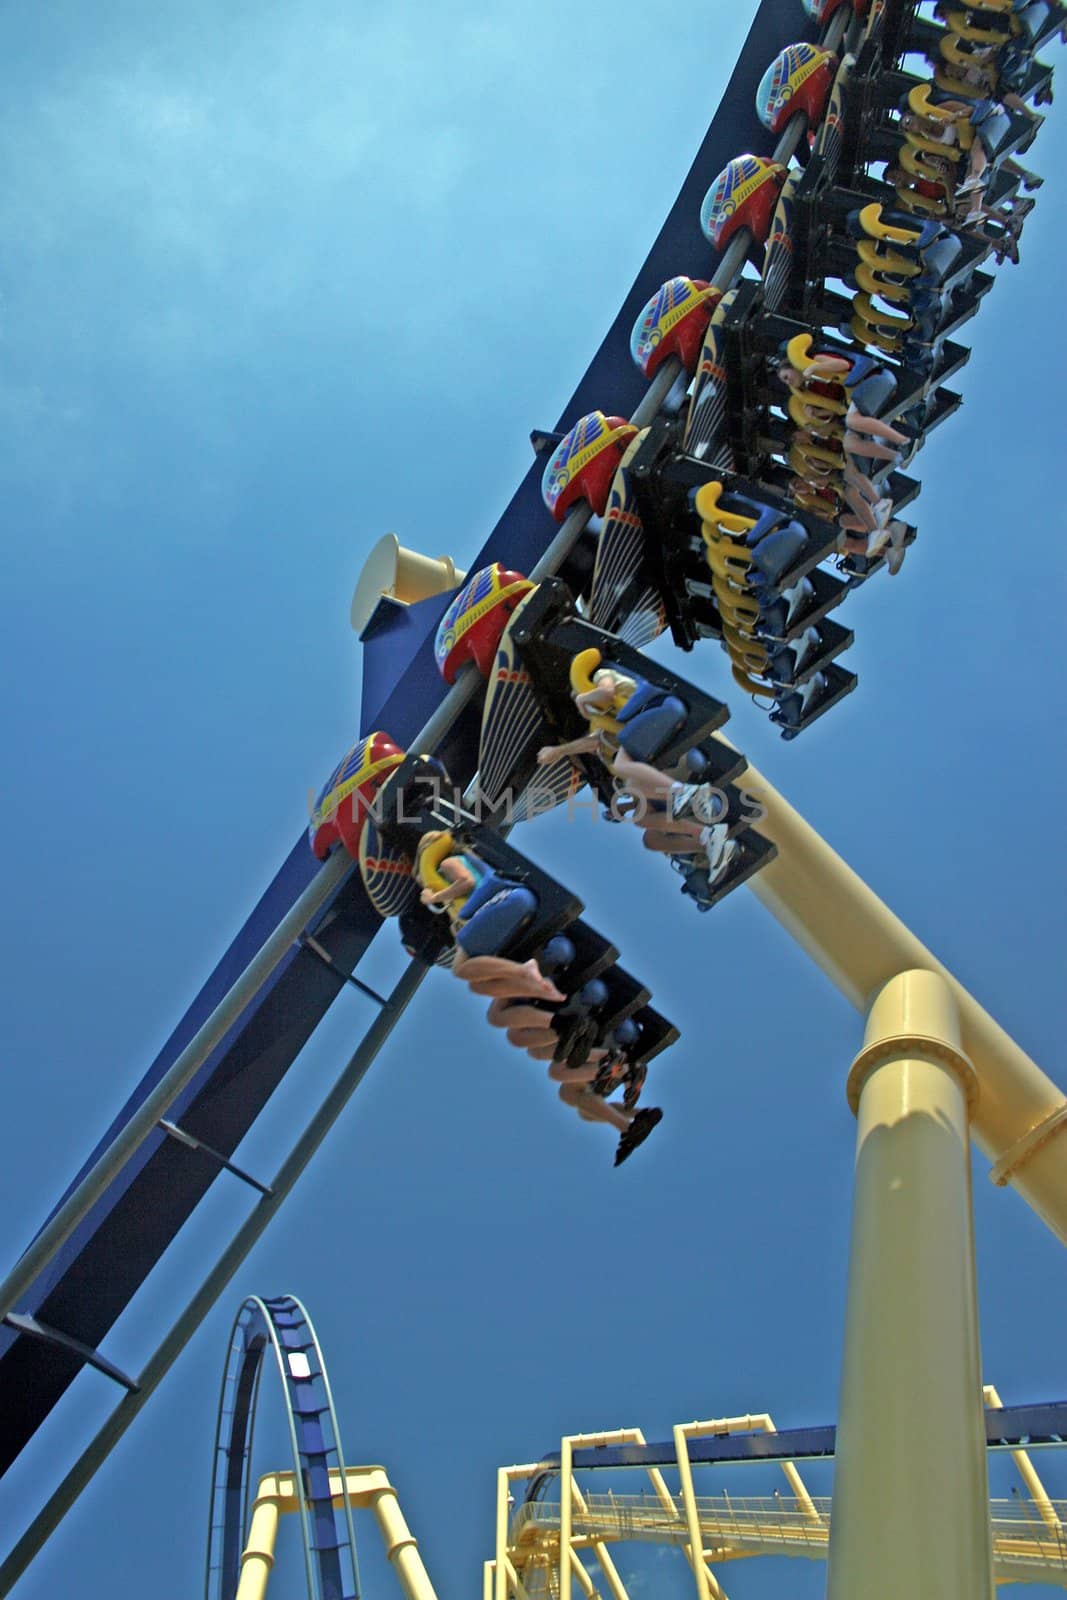 A Roller Coaster with Track and People in Florida.